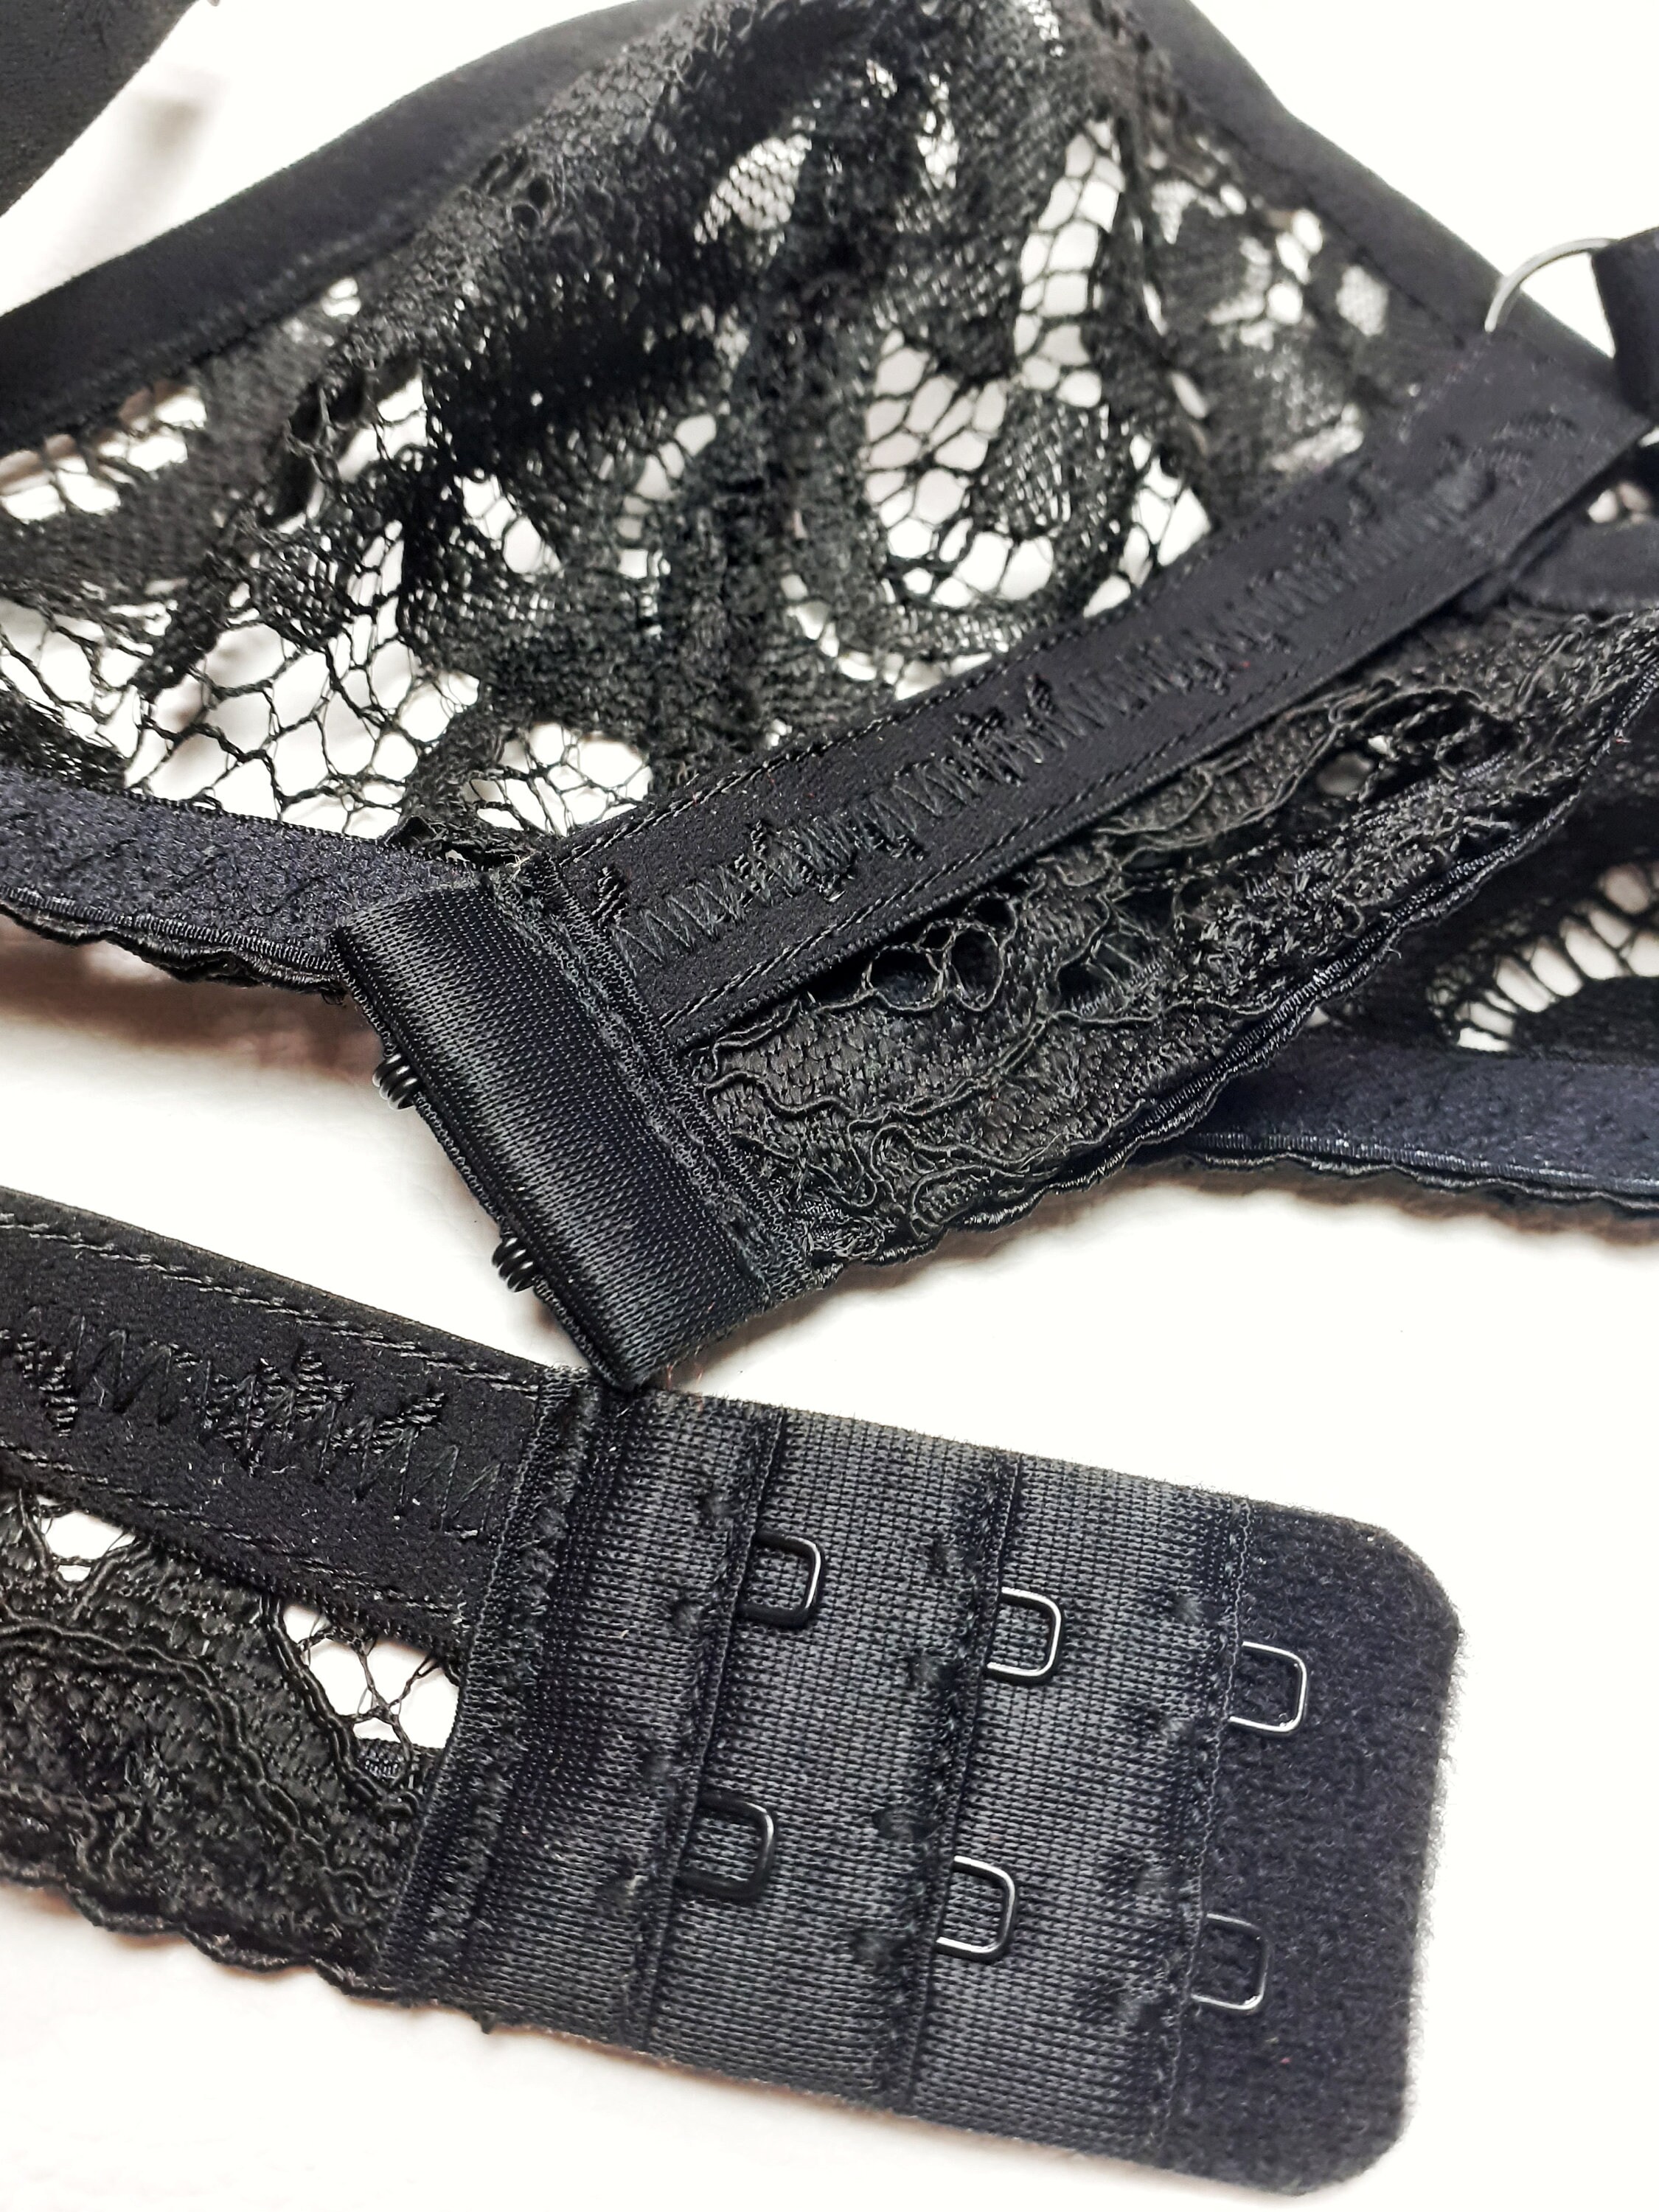 Black lace soft cup bra. Wire free, sexy see thru floral underwear. Handmade to order lingerie to your size. photo